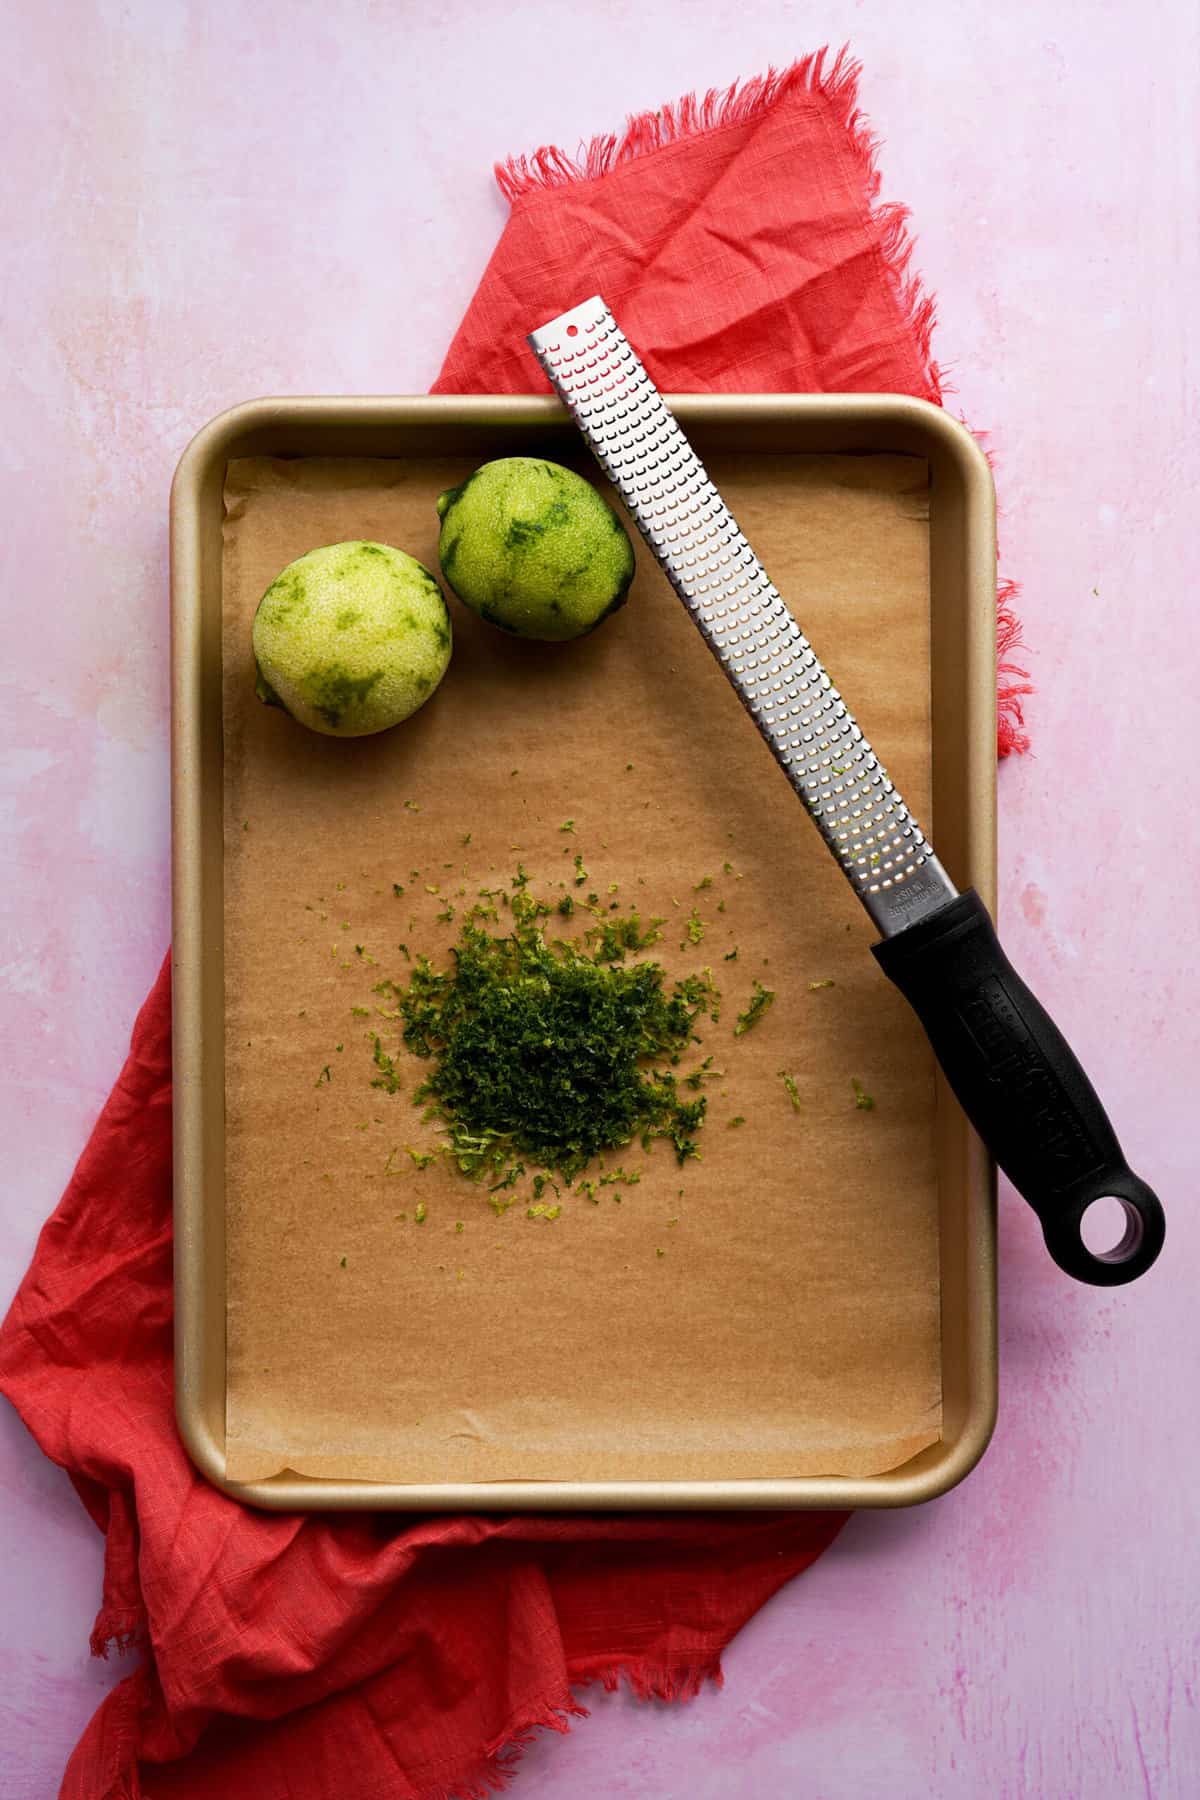 Two limes sit on a small sheet pan lined with parchment paper. They have been zested using a microplane grater and the zest of the limes sits in the center of the pan.